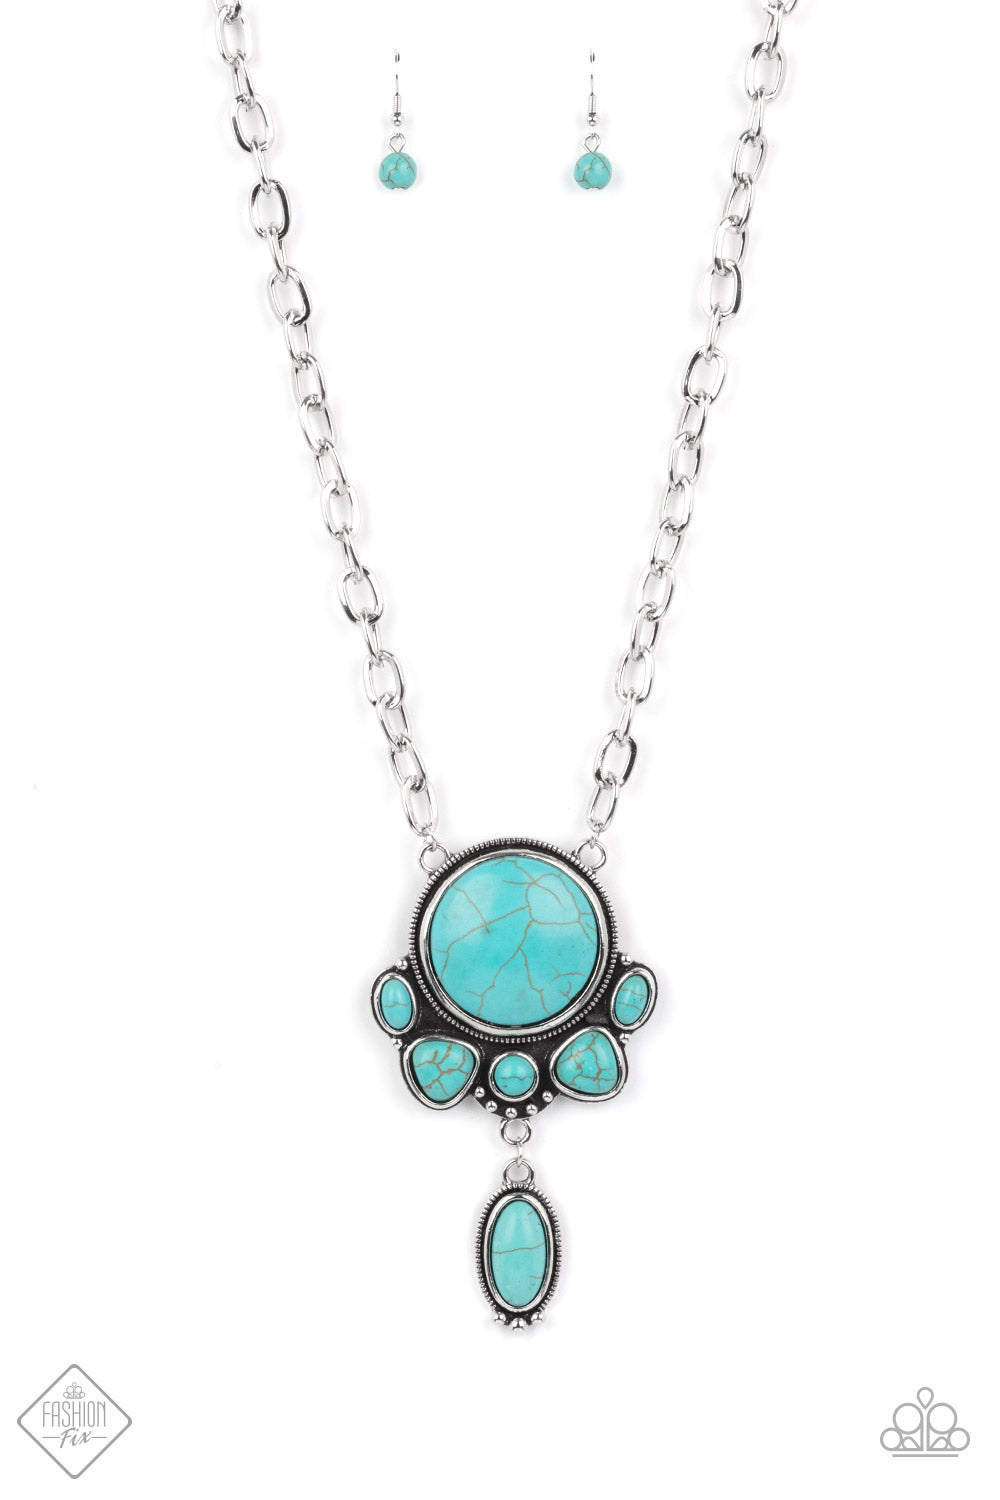 Geographically Gorgeous - Blue Necklace